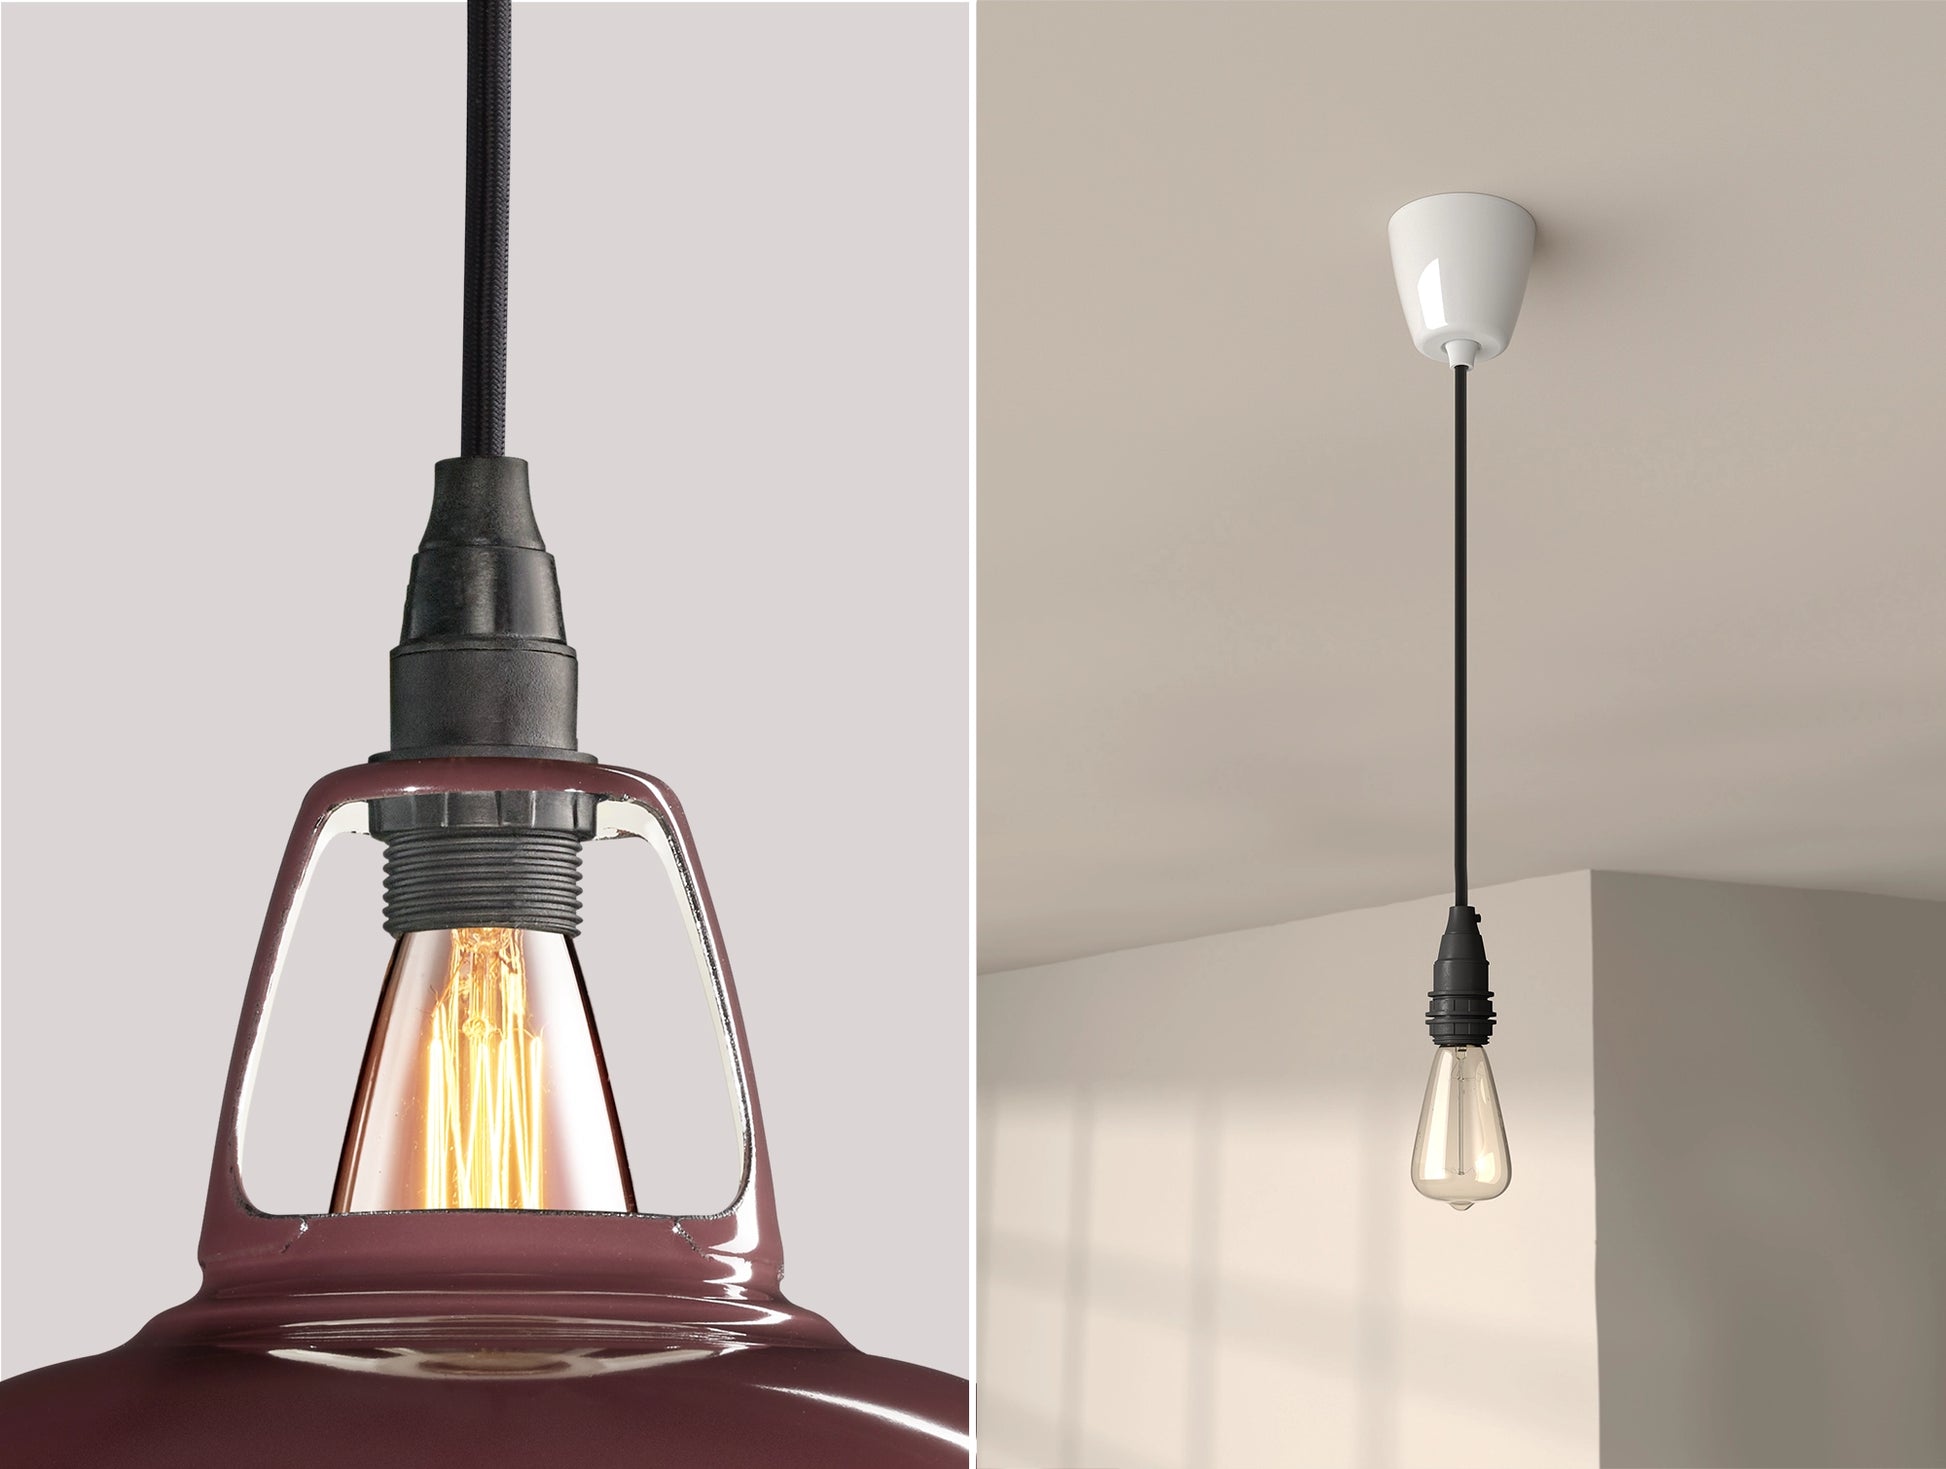 Close up of an E14 Industrial suspension set on a Metropolitan lampshade on the left. On the right, an E14 Industrial pendant set with a lightbulb is hanging from the ceiling